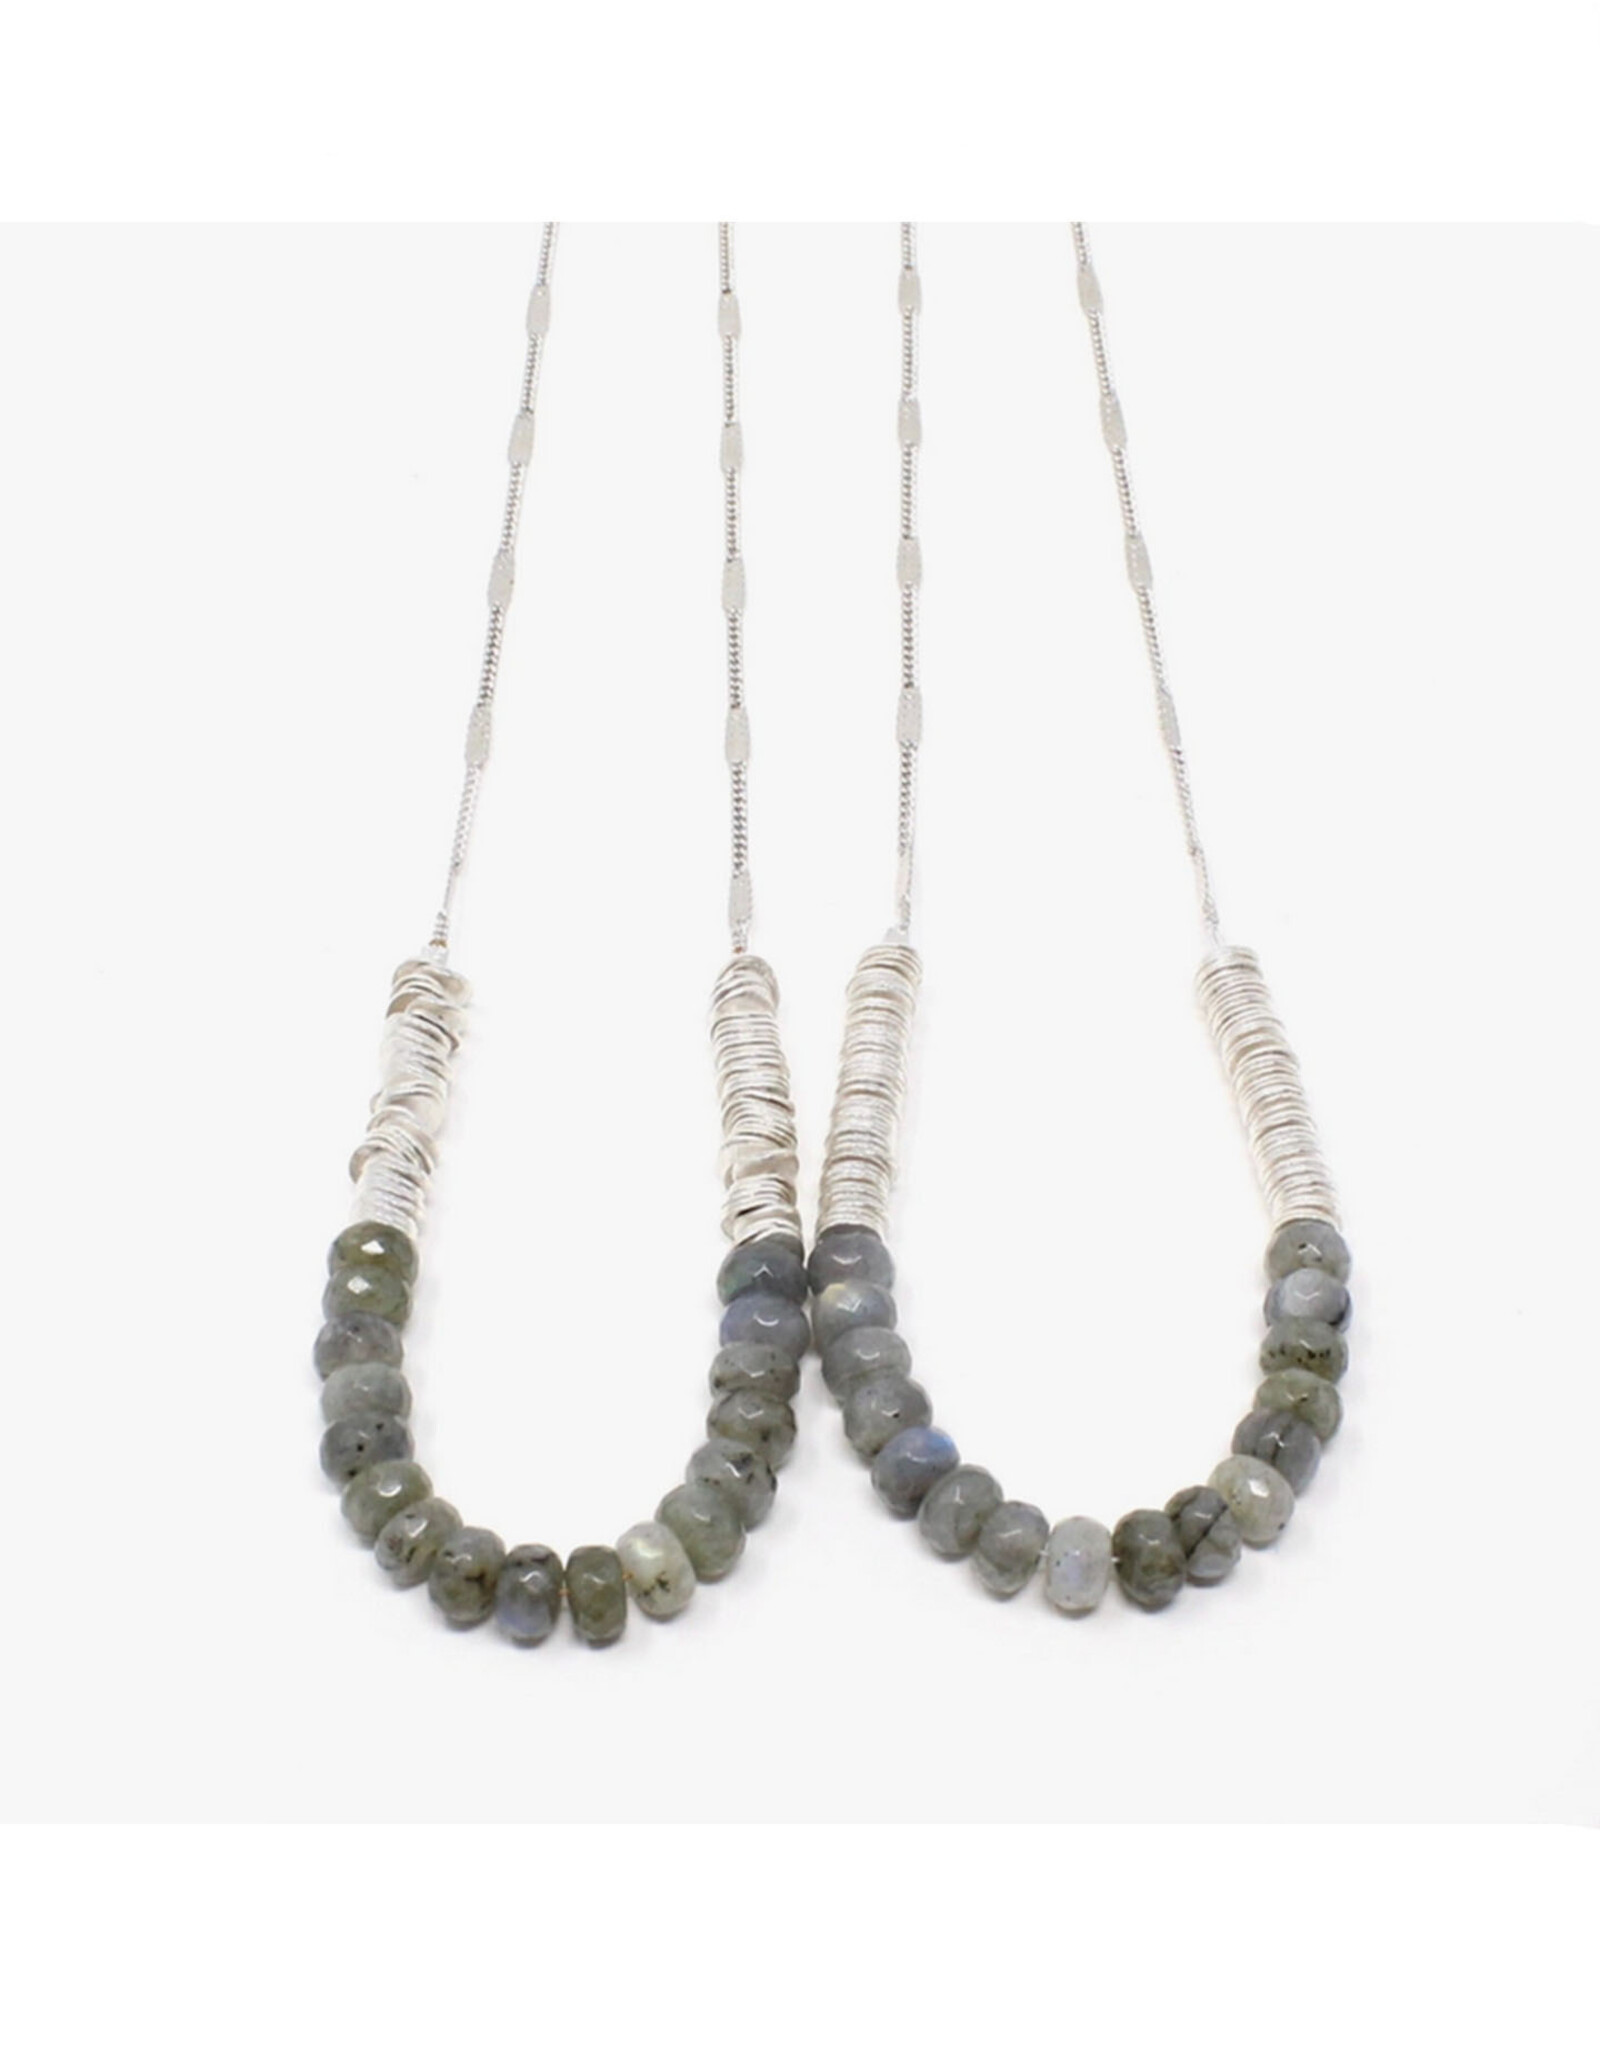 Tide Necklace - Grey & Wavy Silver Beads